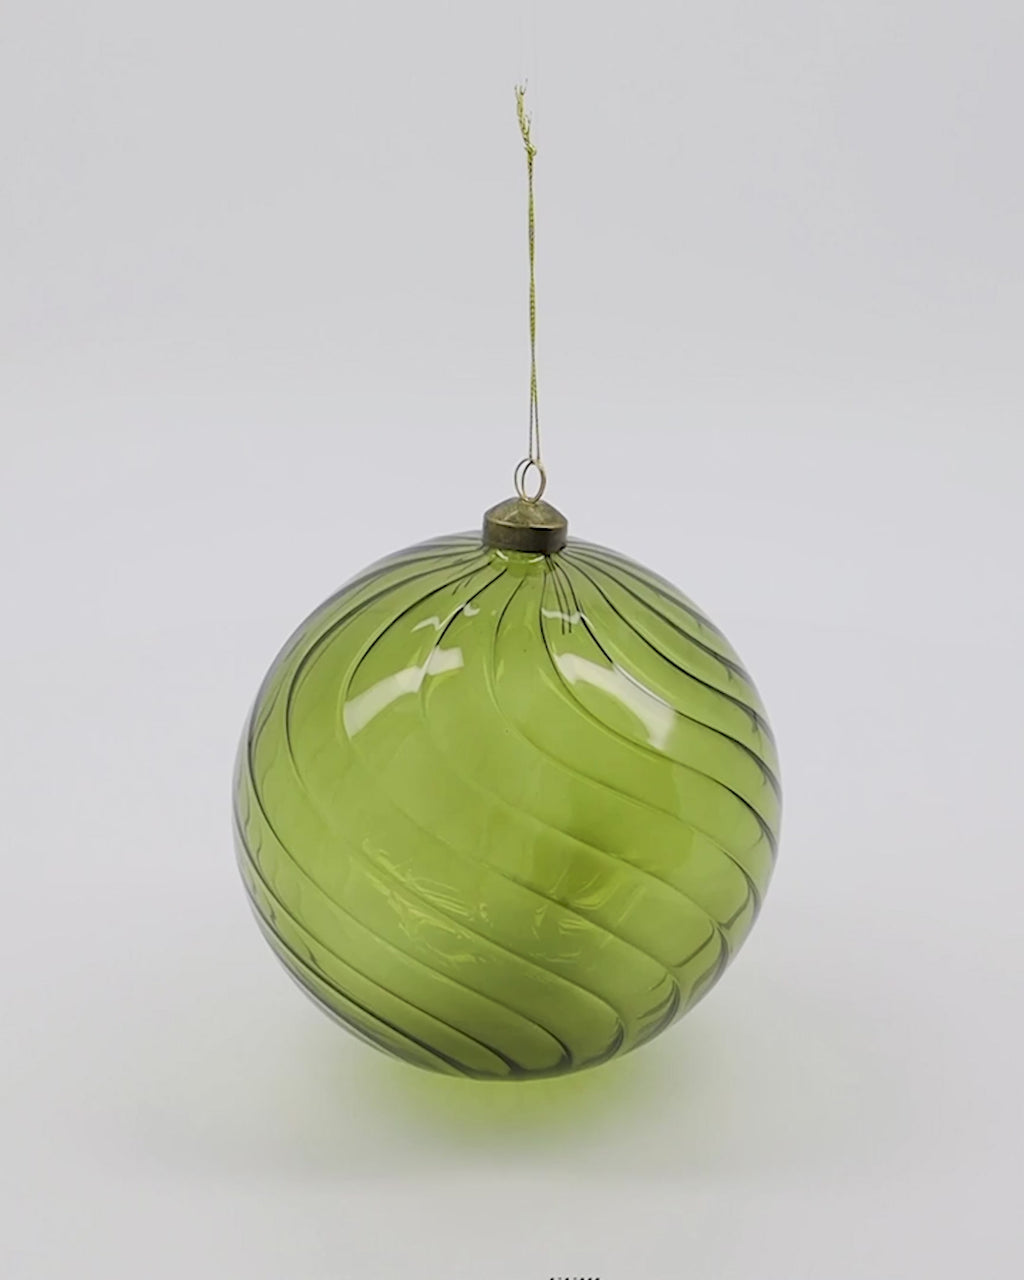 A 360 degree video of a green Christmas bauble made from glass.